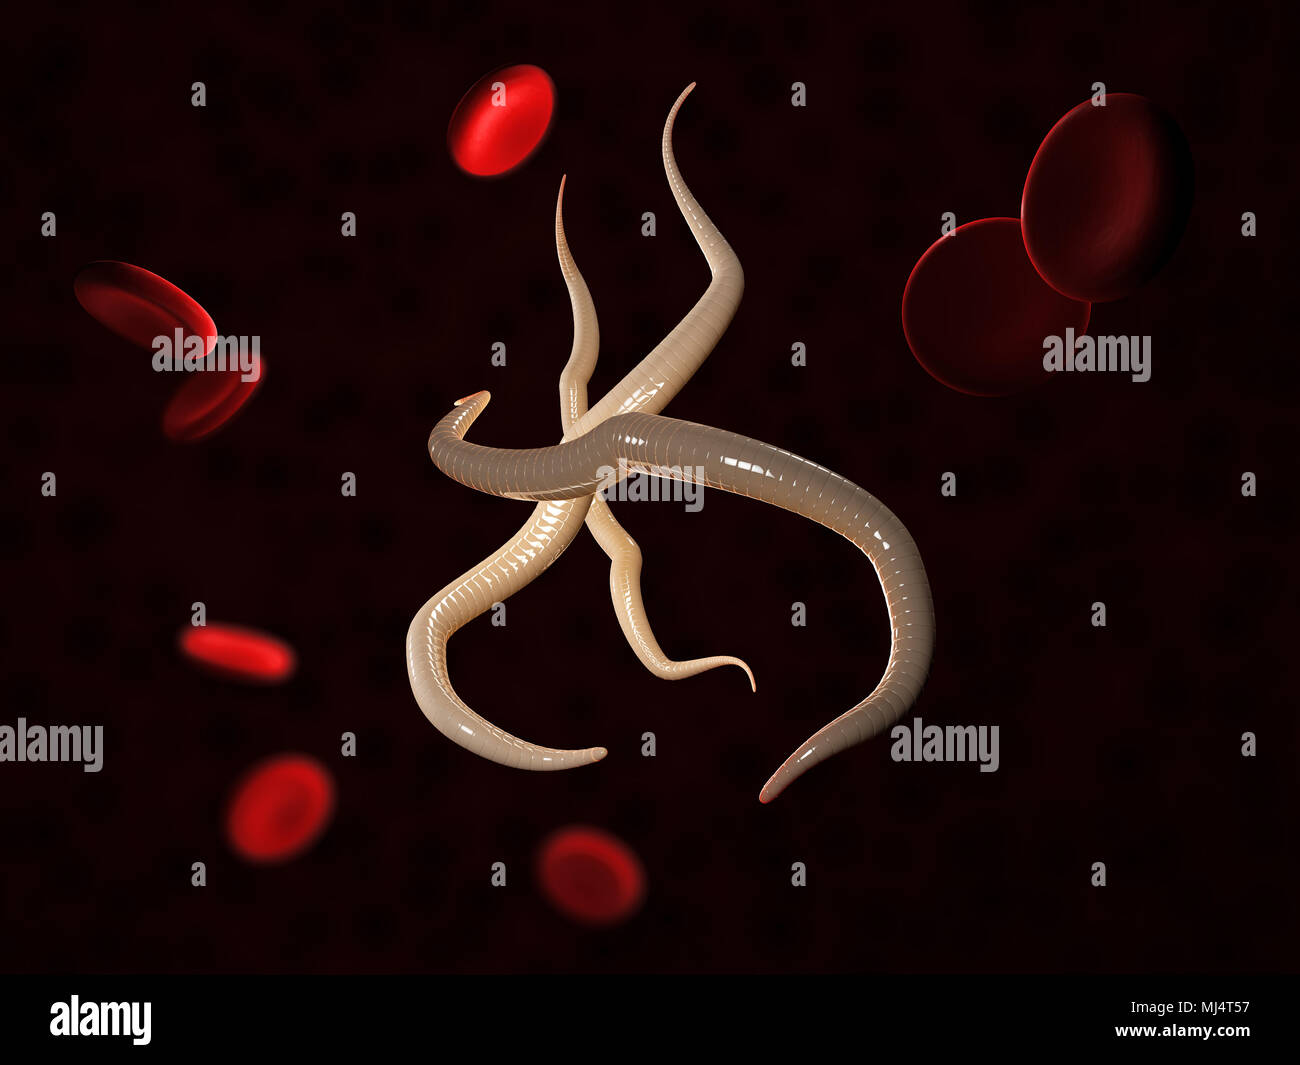 Parasitic nematode worms with blood cells, 3d Illustration Stock Photo